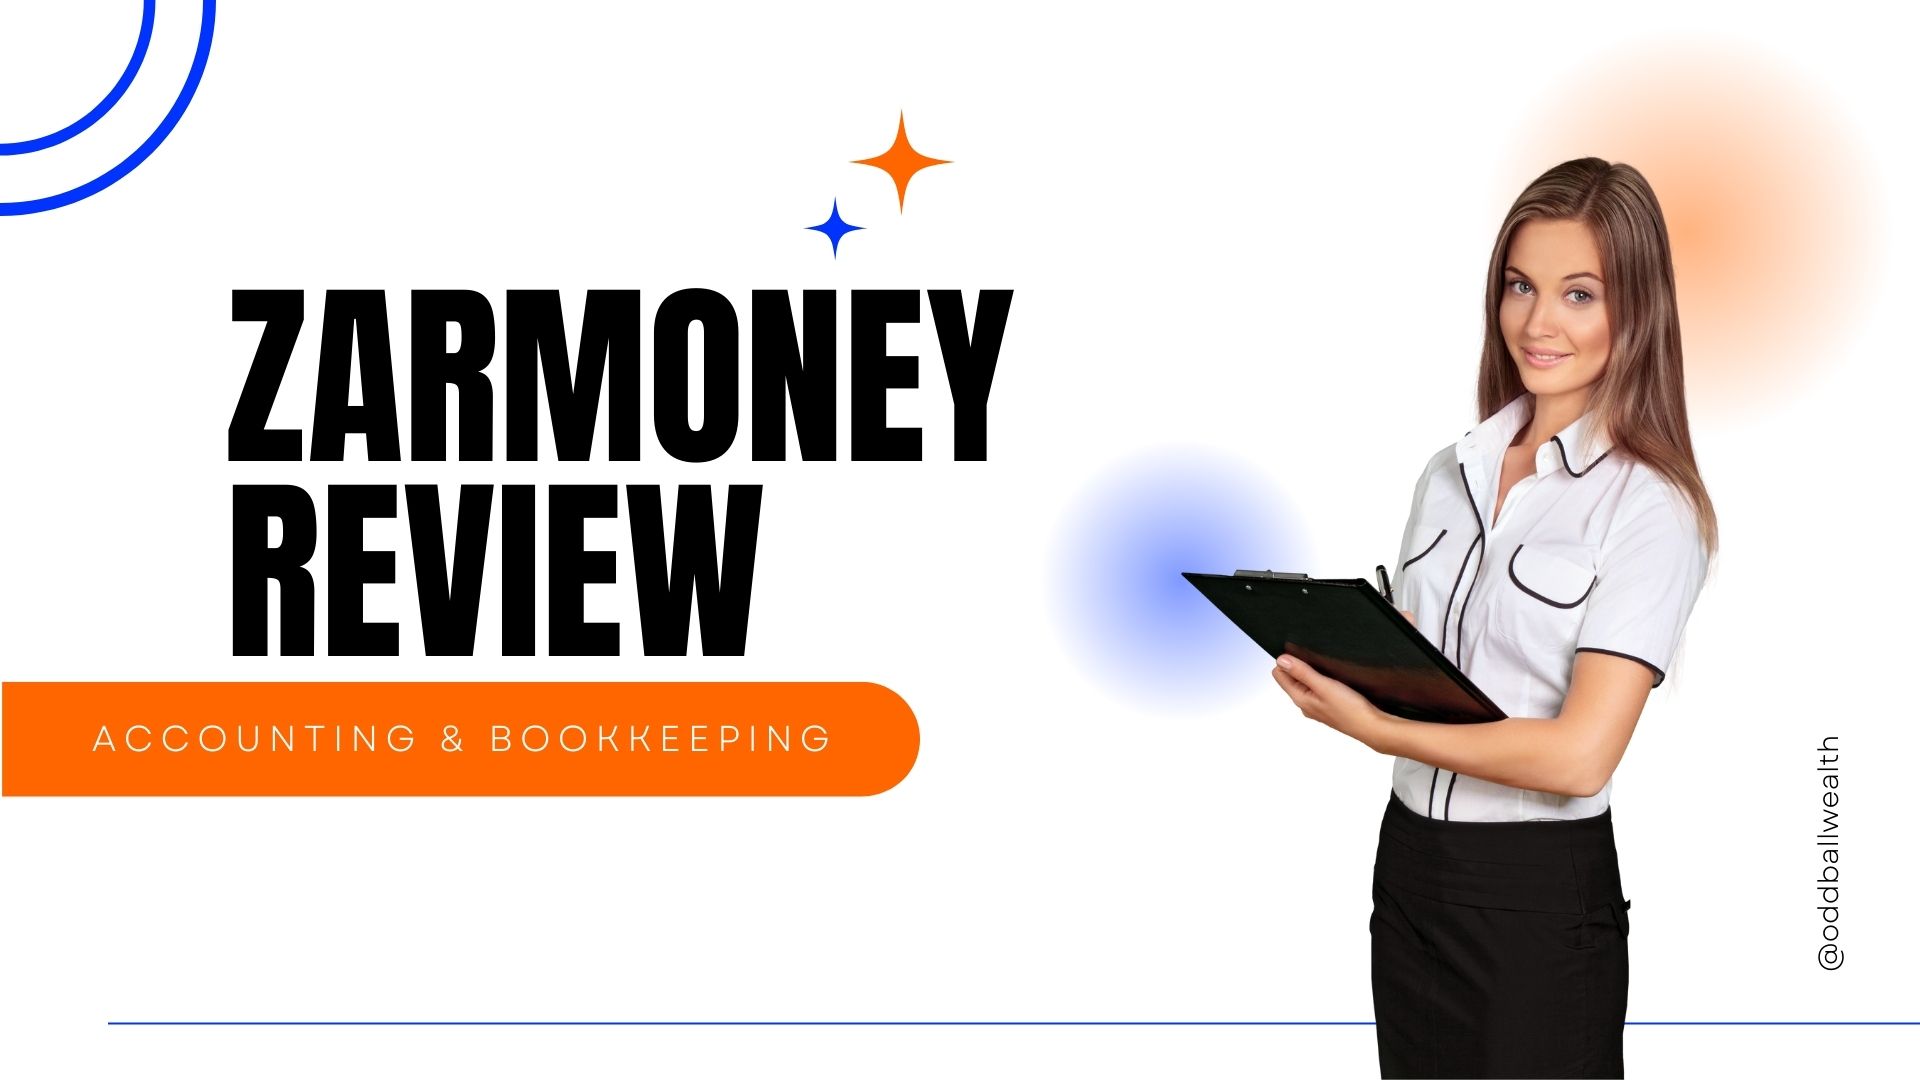 ZarMoney Review - Cloud-based accounting and bookkeeping software